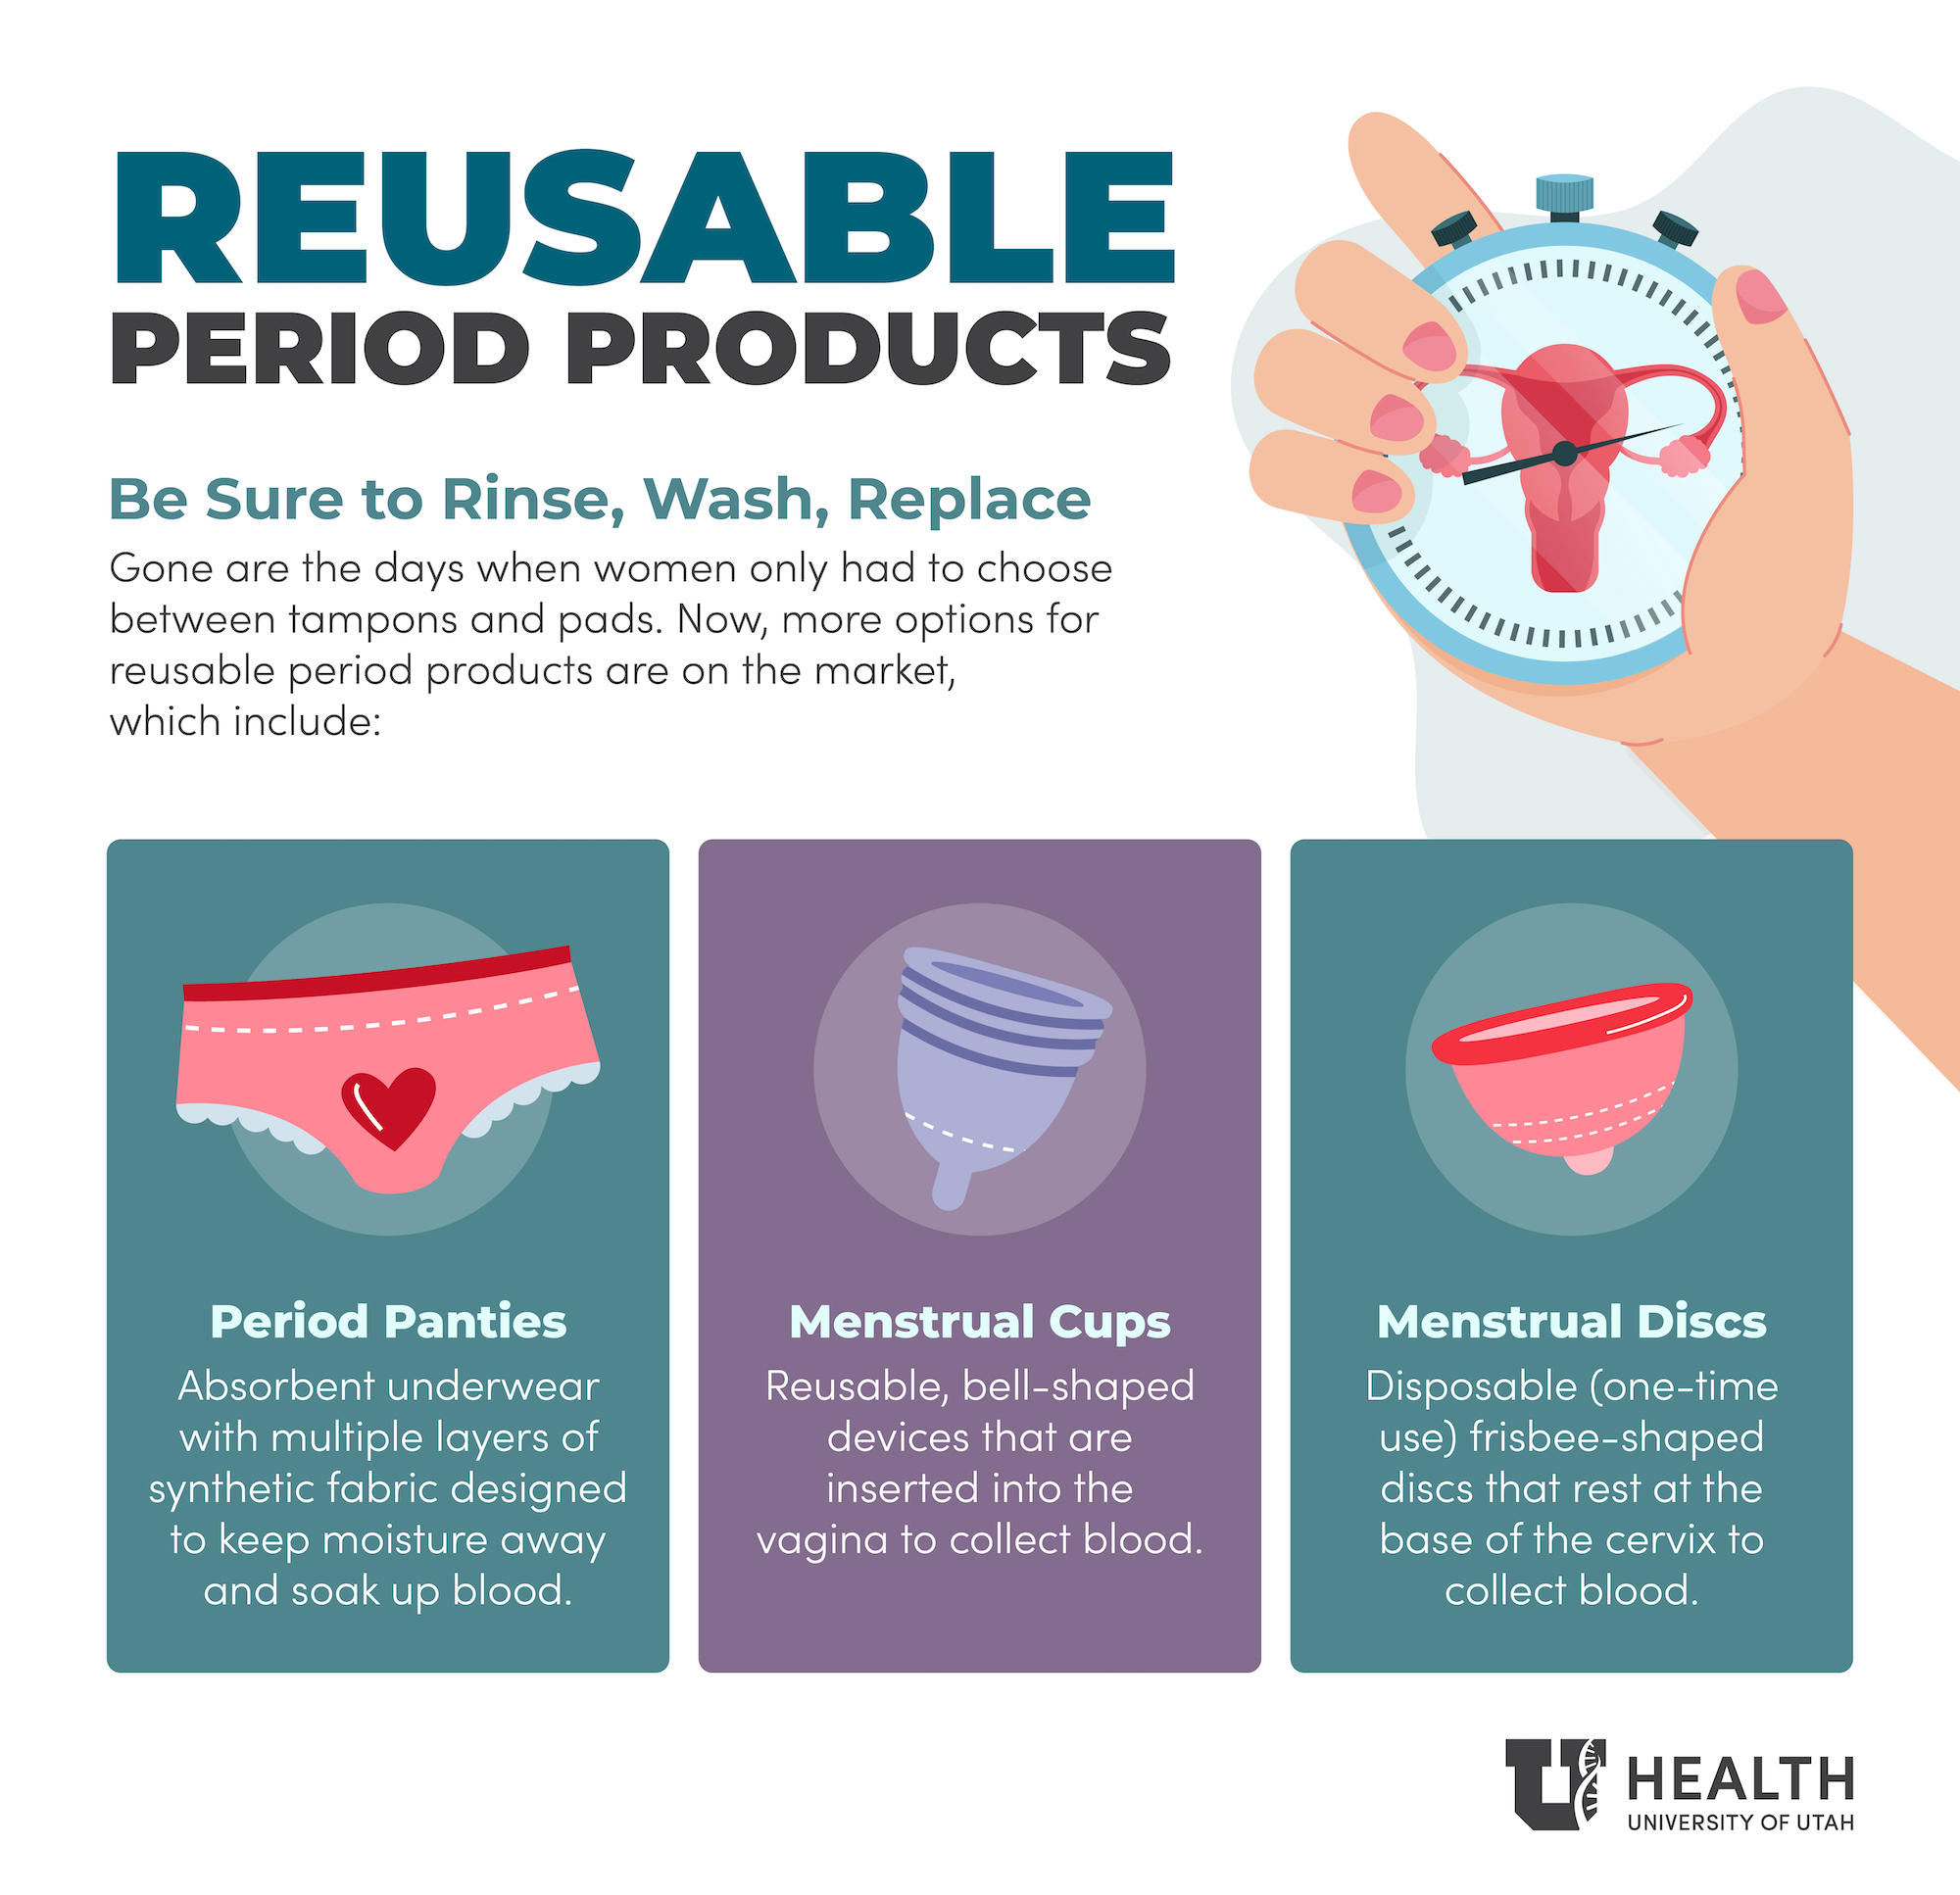 Reusable period products